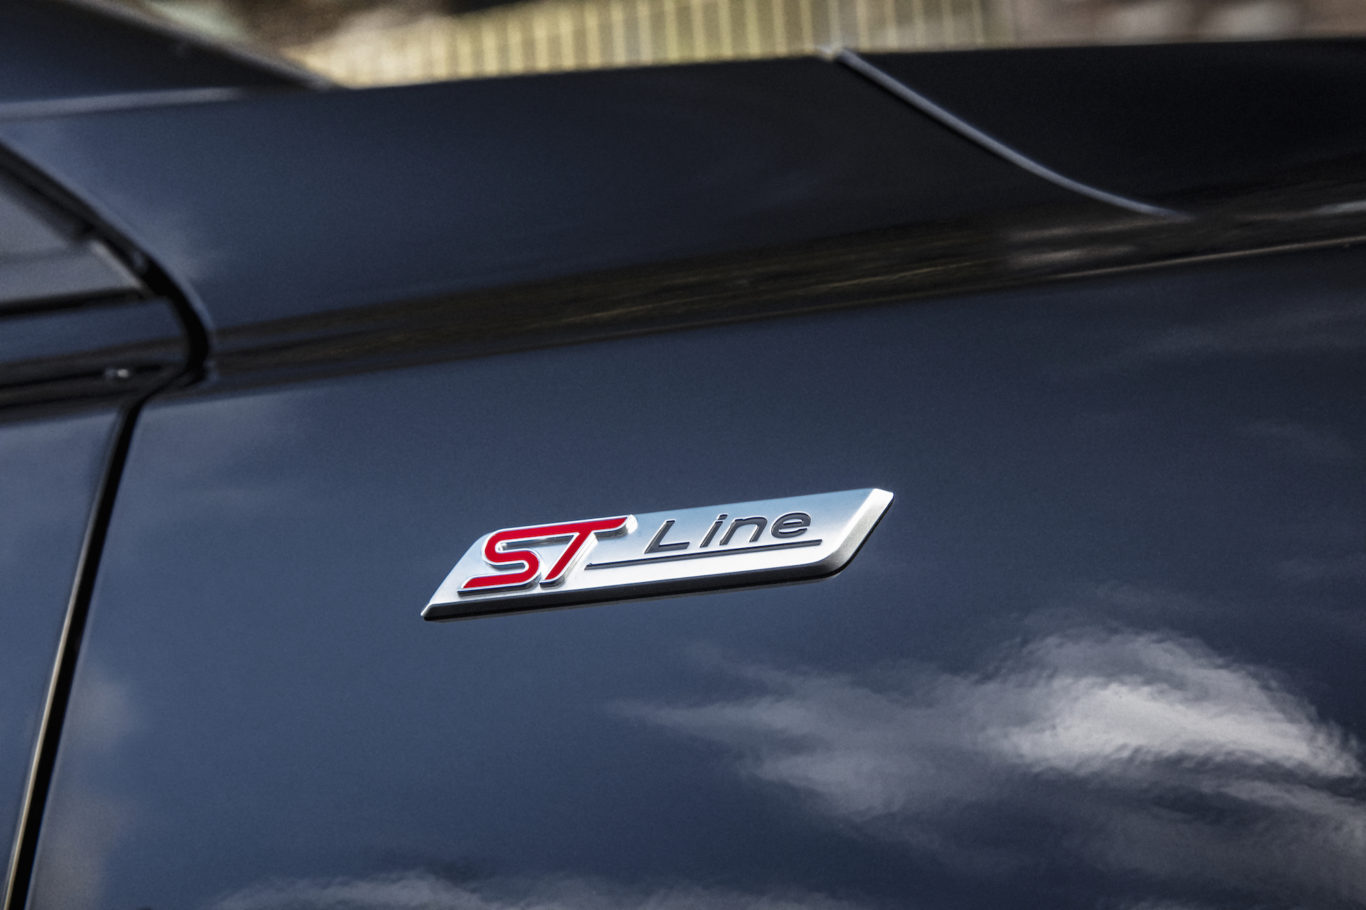 ST-Line is the sportiest trim in the range